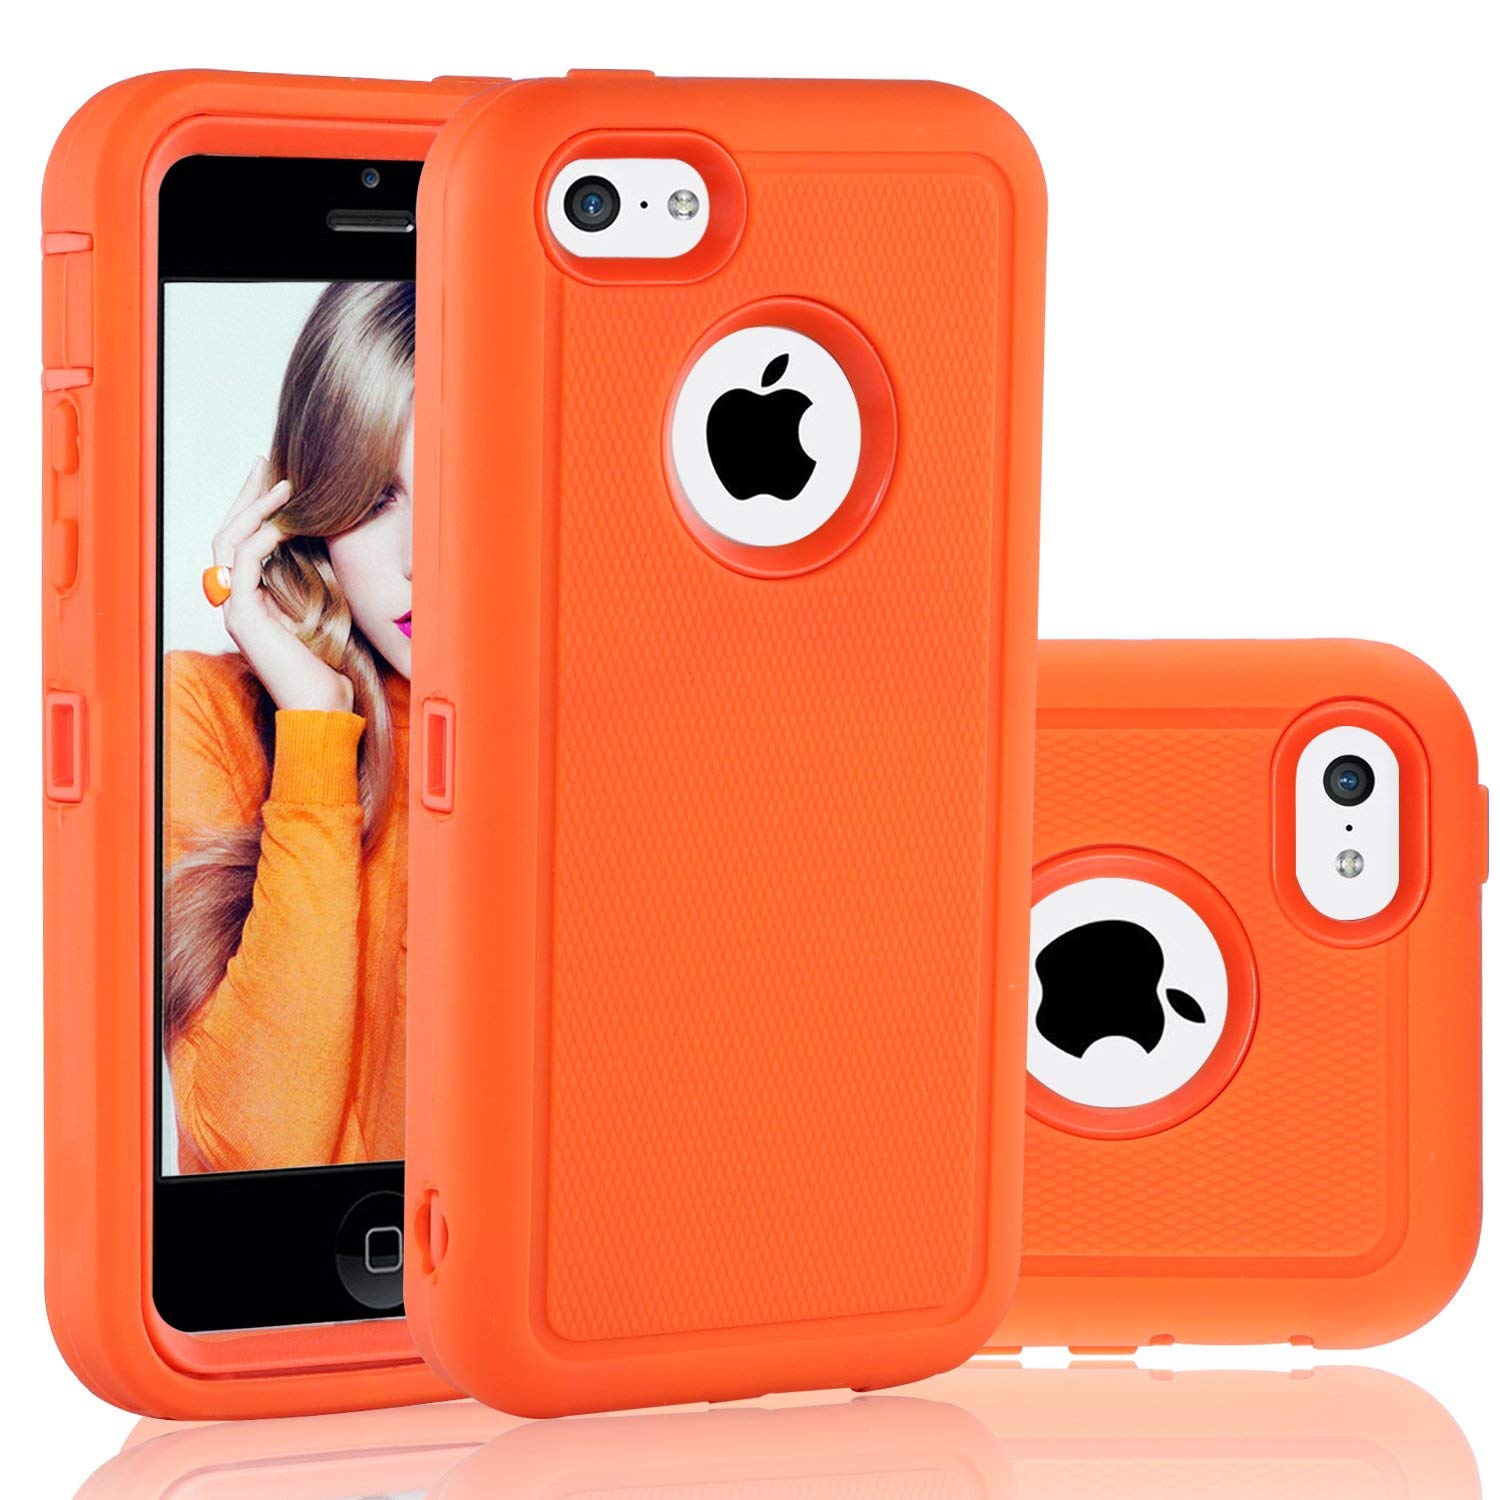 iPhone 5C Case, FOGEEK Dual layer Anti Slip 360 Full Body Cover Case PC and TPU Shockproof Protective Compatible for Apple iPhone 5C ONLY(Orange)